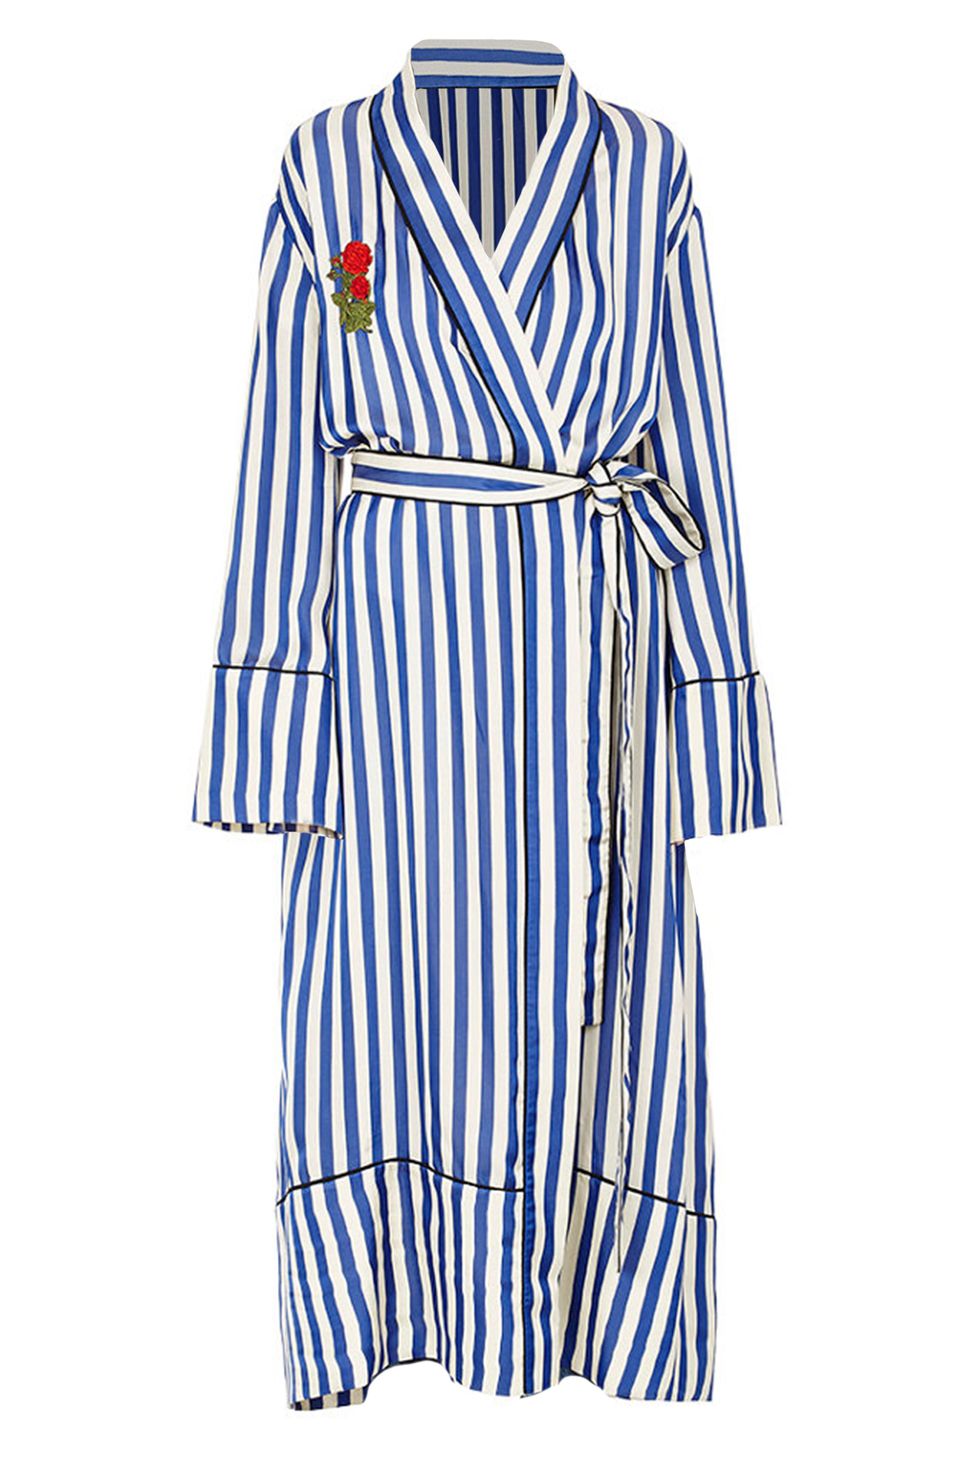 <p>
Off-White c/o Virgil Abloh Striped Appliquéd Robe Coat, $2,670; <a href="http://www.barneys.com/product/off-white-c-2fo-virgil-abloh-striped-appliqu-c3-a9d-robe-coat-504892400.html">barneys.com</a></p><p><span class="redactor-invisible-space" data-verified="redactor" data-redactor-tag="span" data-redactor-class="redactor-invisible-space"></span></p>